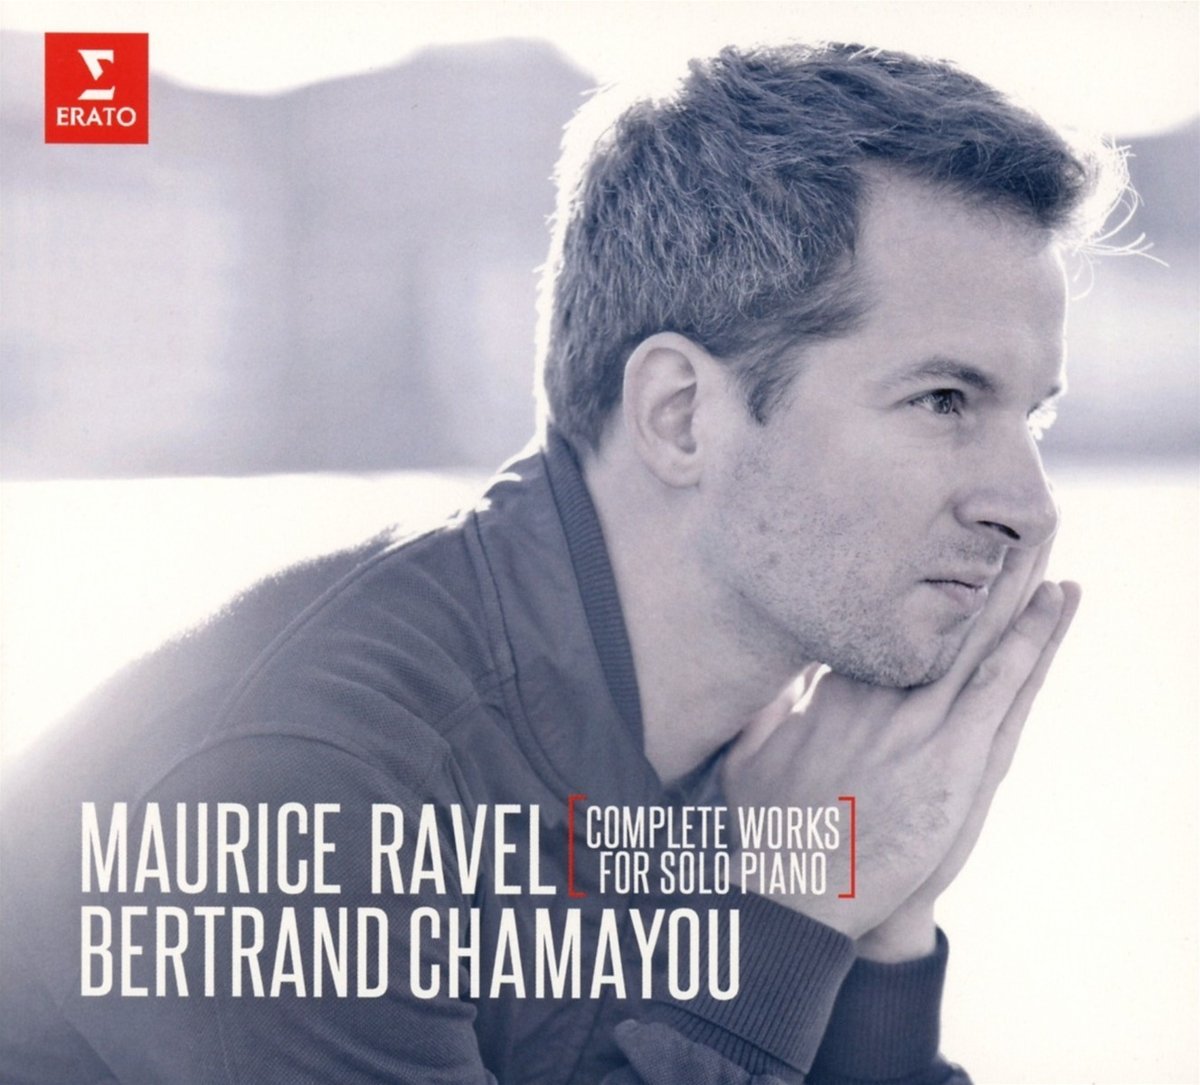 Ravel: Complete Works for Solo Piano | Bertrand Chamayou, Maurice Ravel Bertrand poza noua